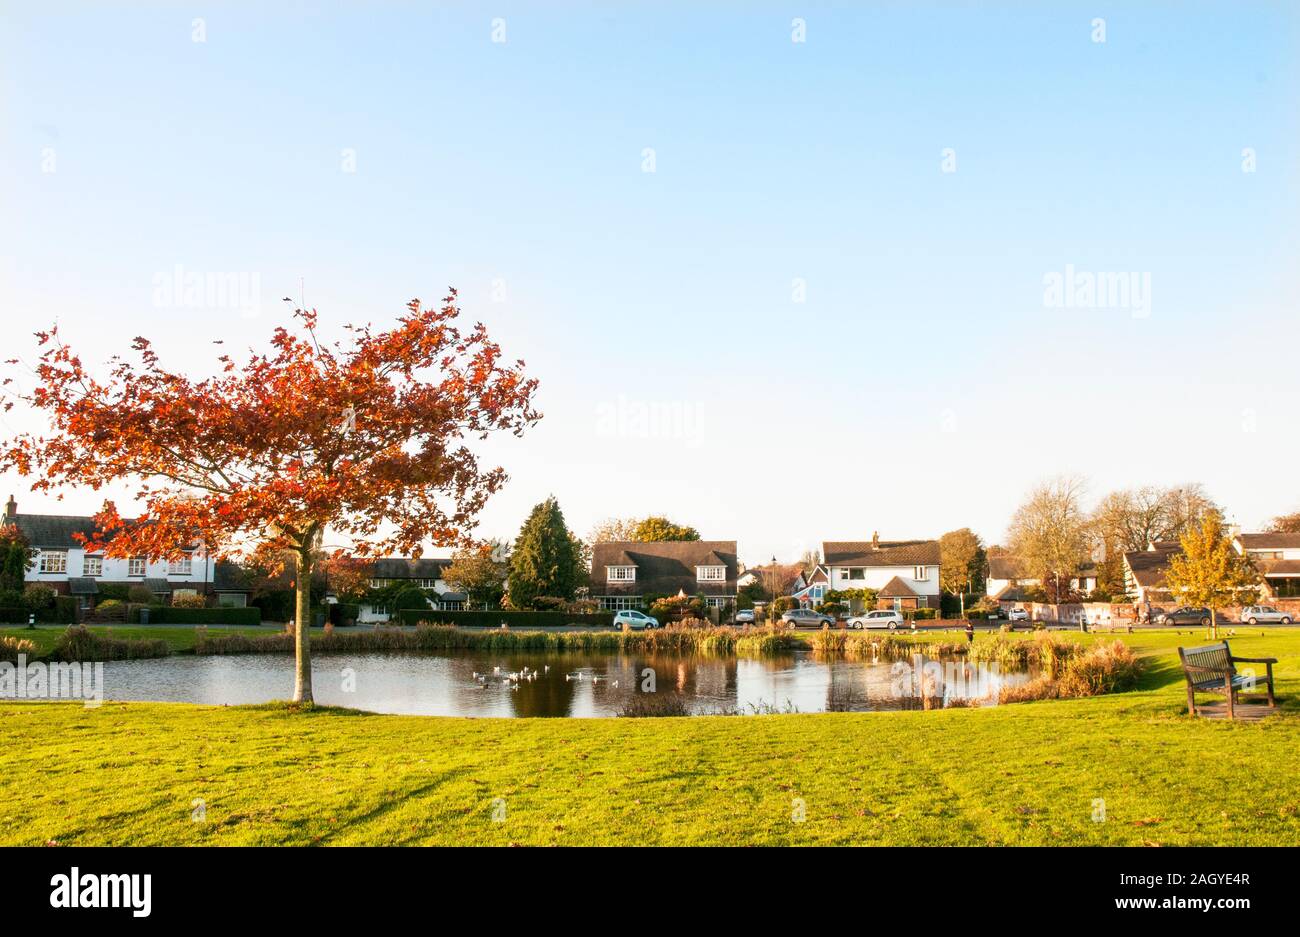 Autumn evening light over an English Village Green and Duck pond at Wrea Green Lancashire England United Kingdom Stock Photo